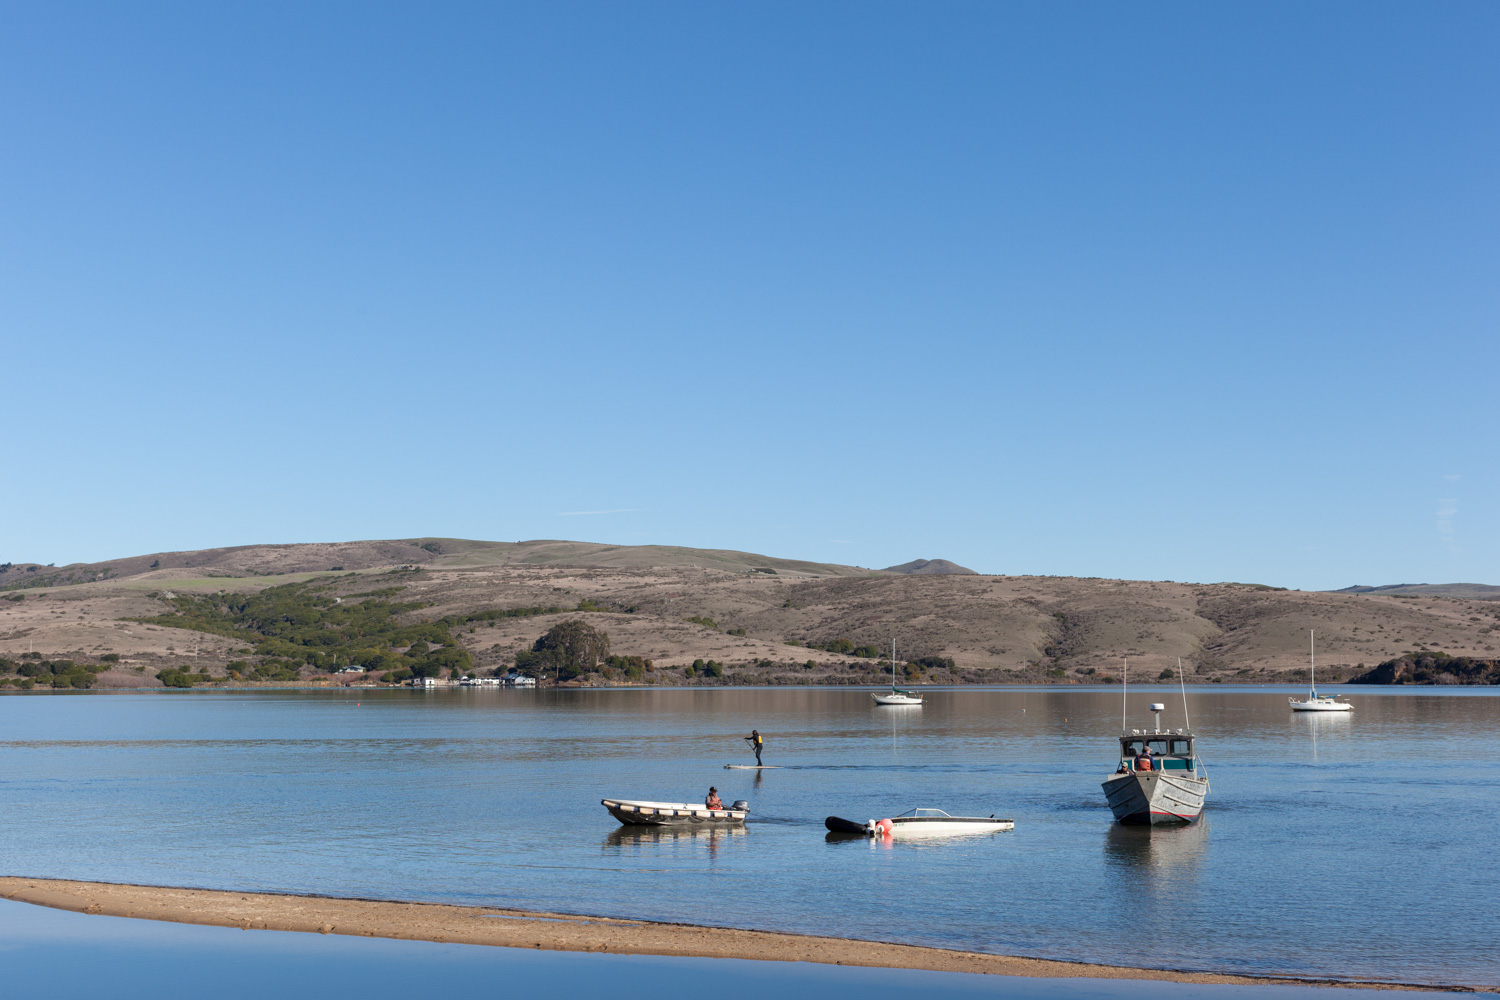 Salvage, Tomales Bay.